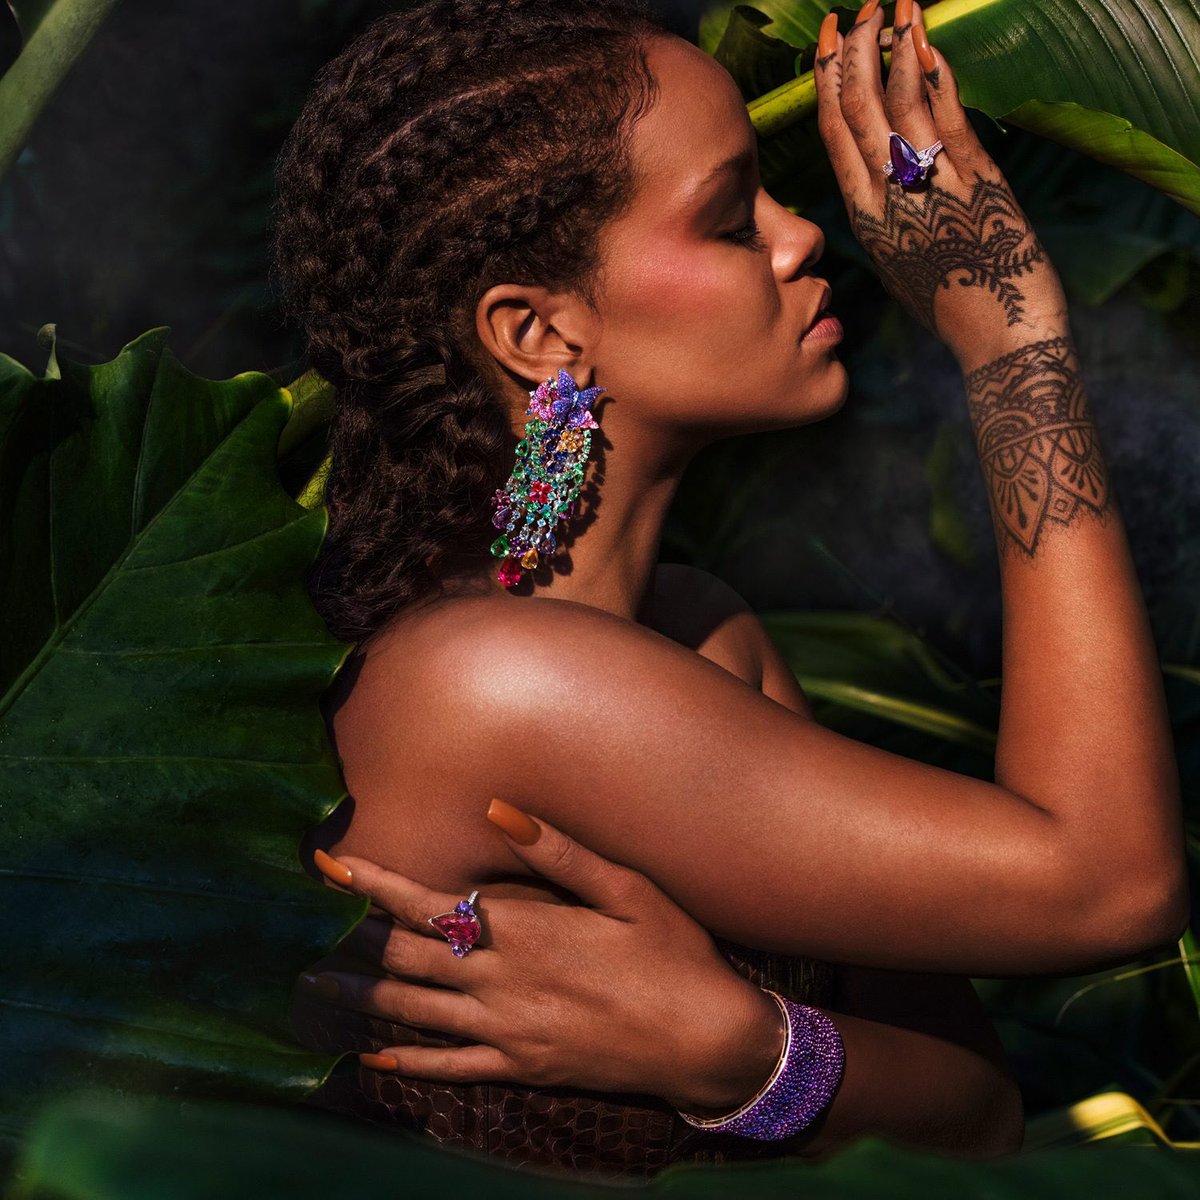 Now, back to the Chopard collaboration.The collection is inspired by Rihanna's home island of Barbados and includes colors indicative of the gardens and foliage there, as well as of the vibrant spirit of Carnival.